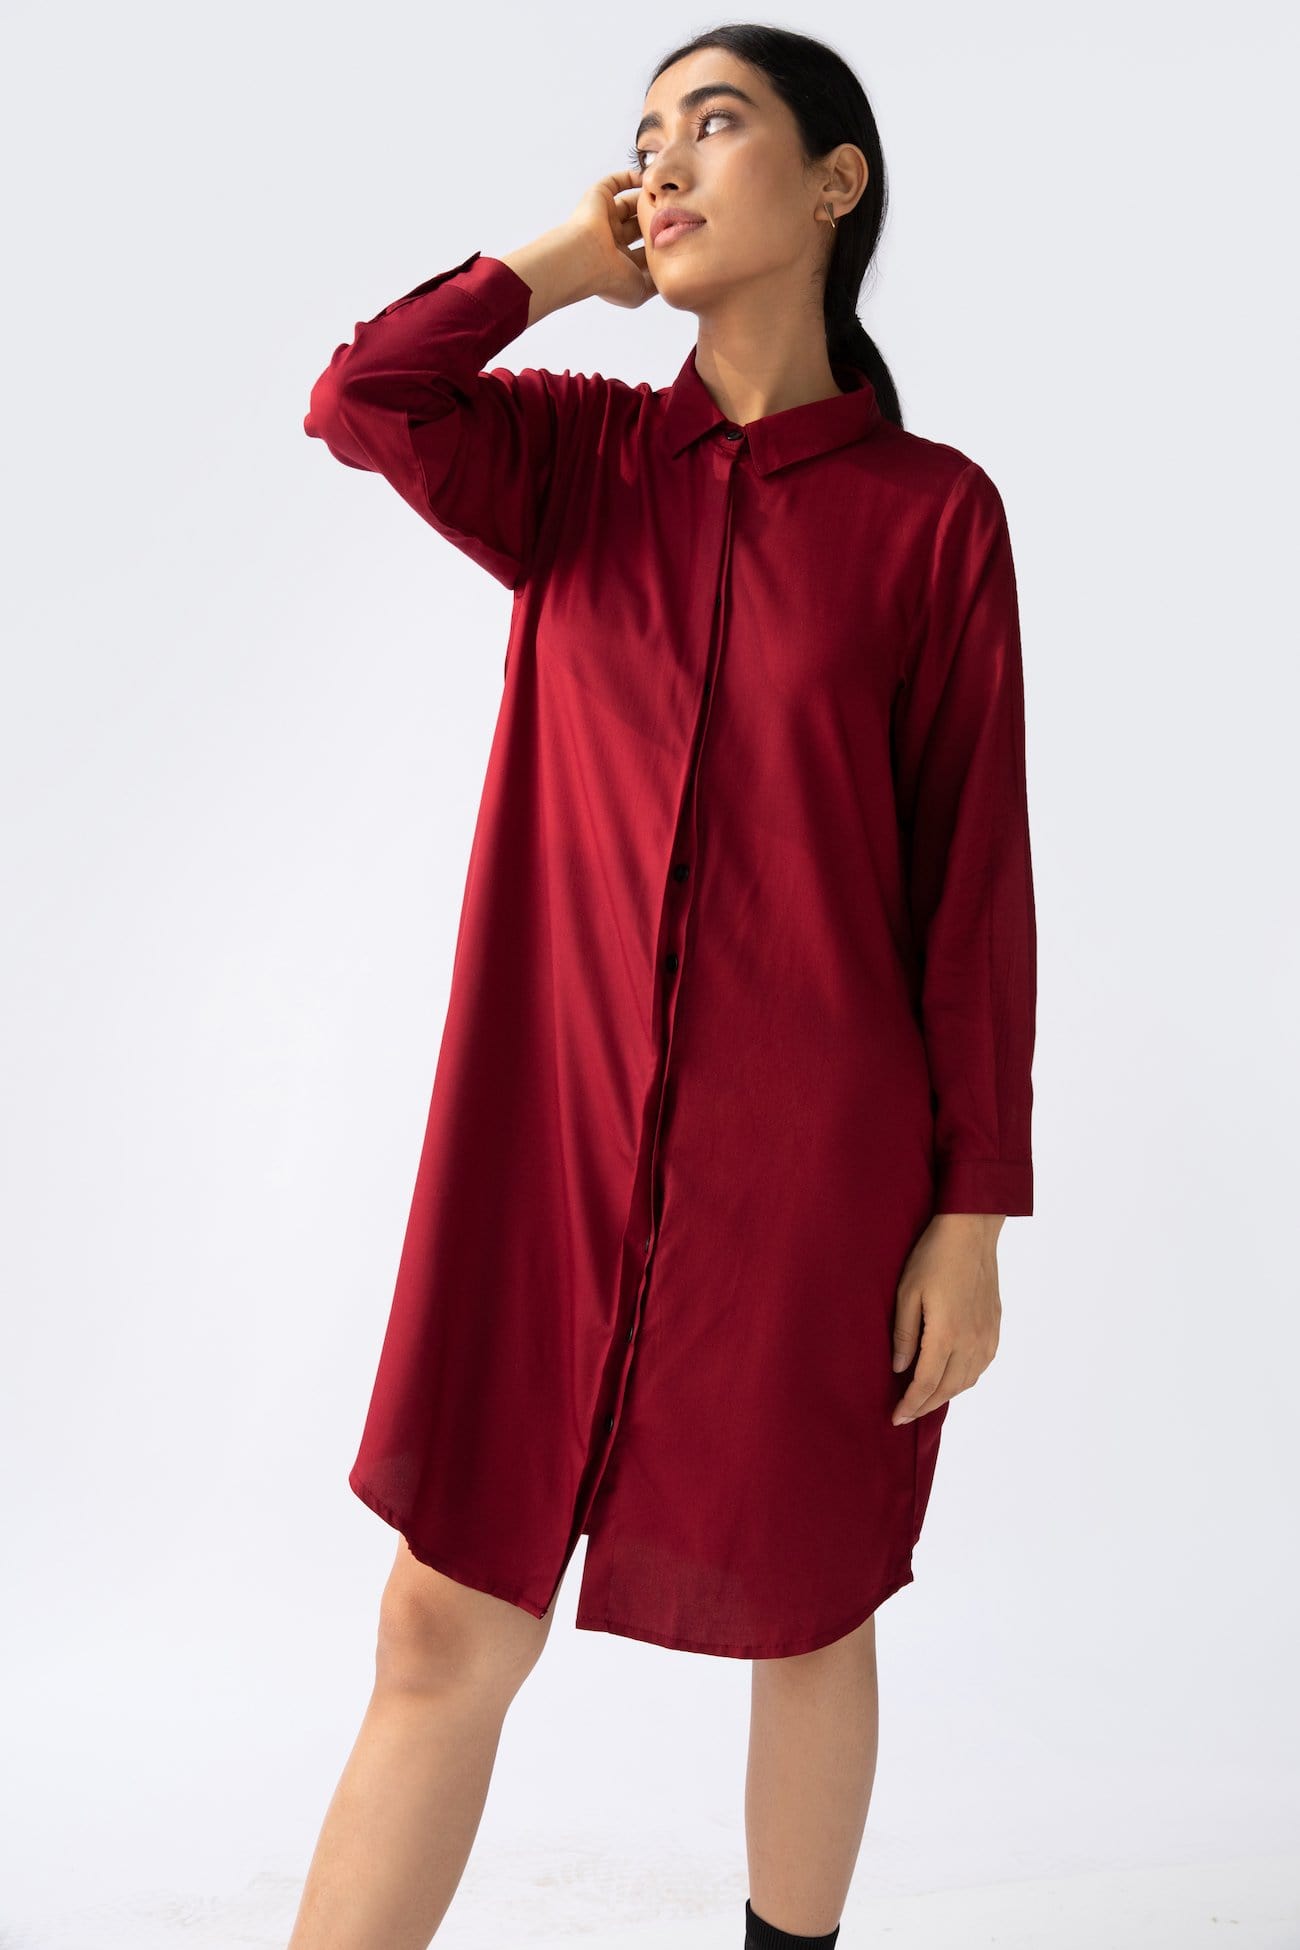 Saltpetre's womens wear - maroon knee-length long shirt with front buttons, full sleeves and collared neck. Made out of 100% organic cotton.